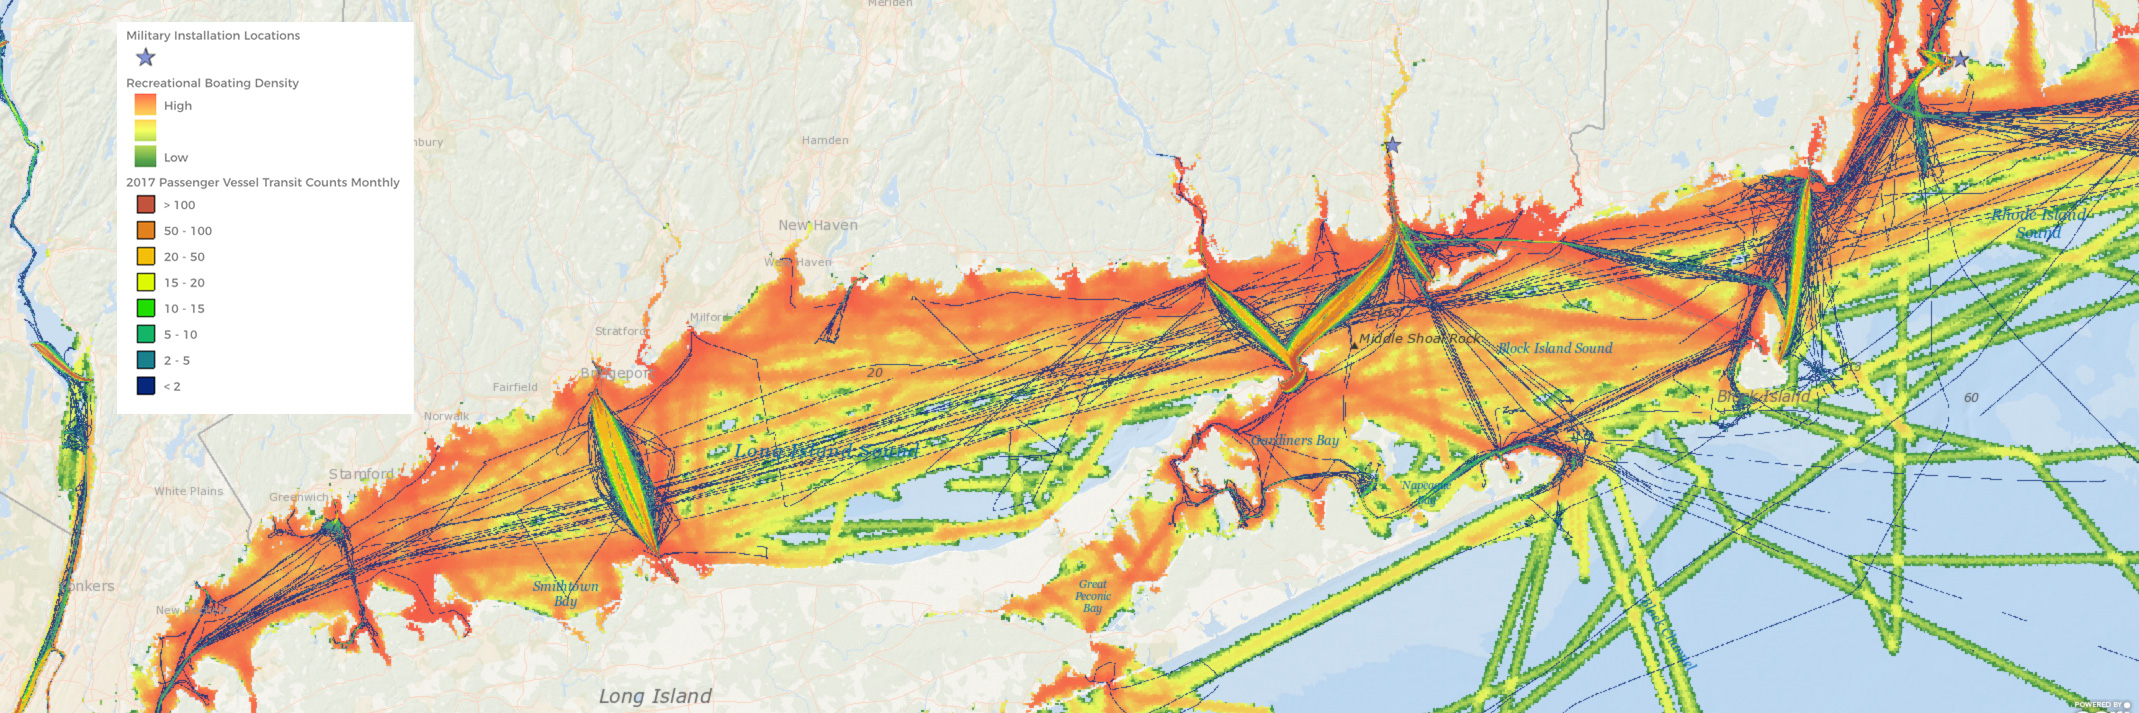 Screenshot of a Portal map showing ferry traffic and recreational boating density in Long Island Sound.